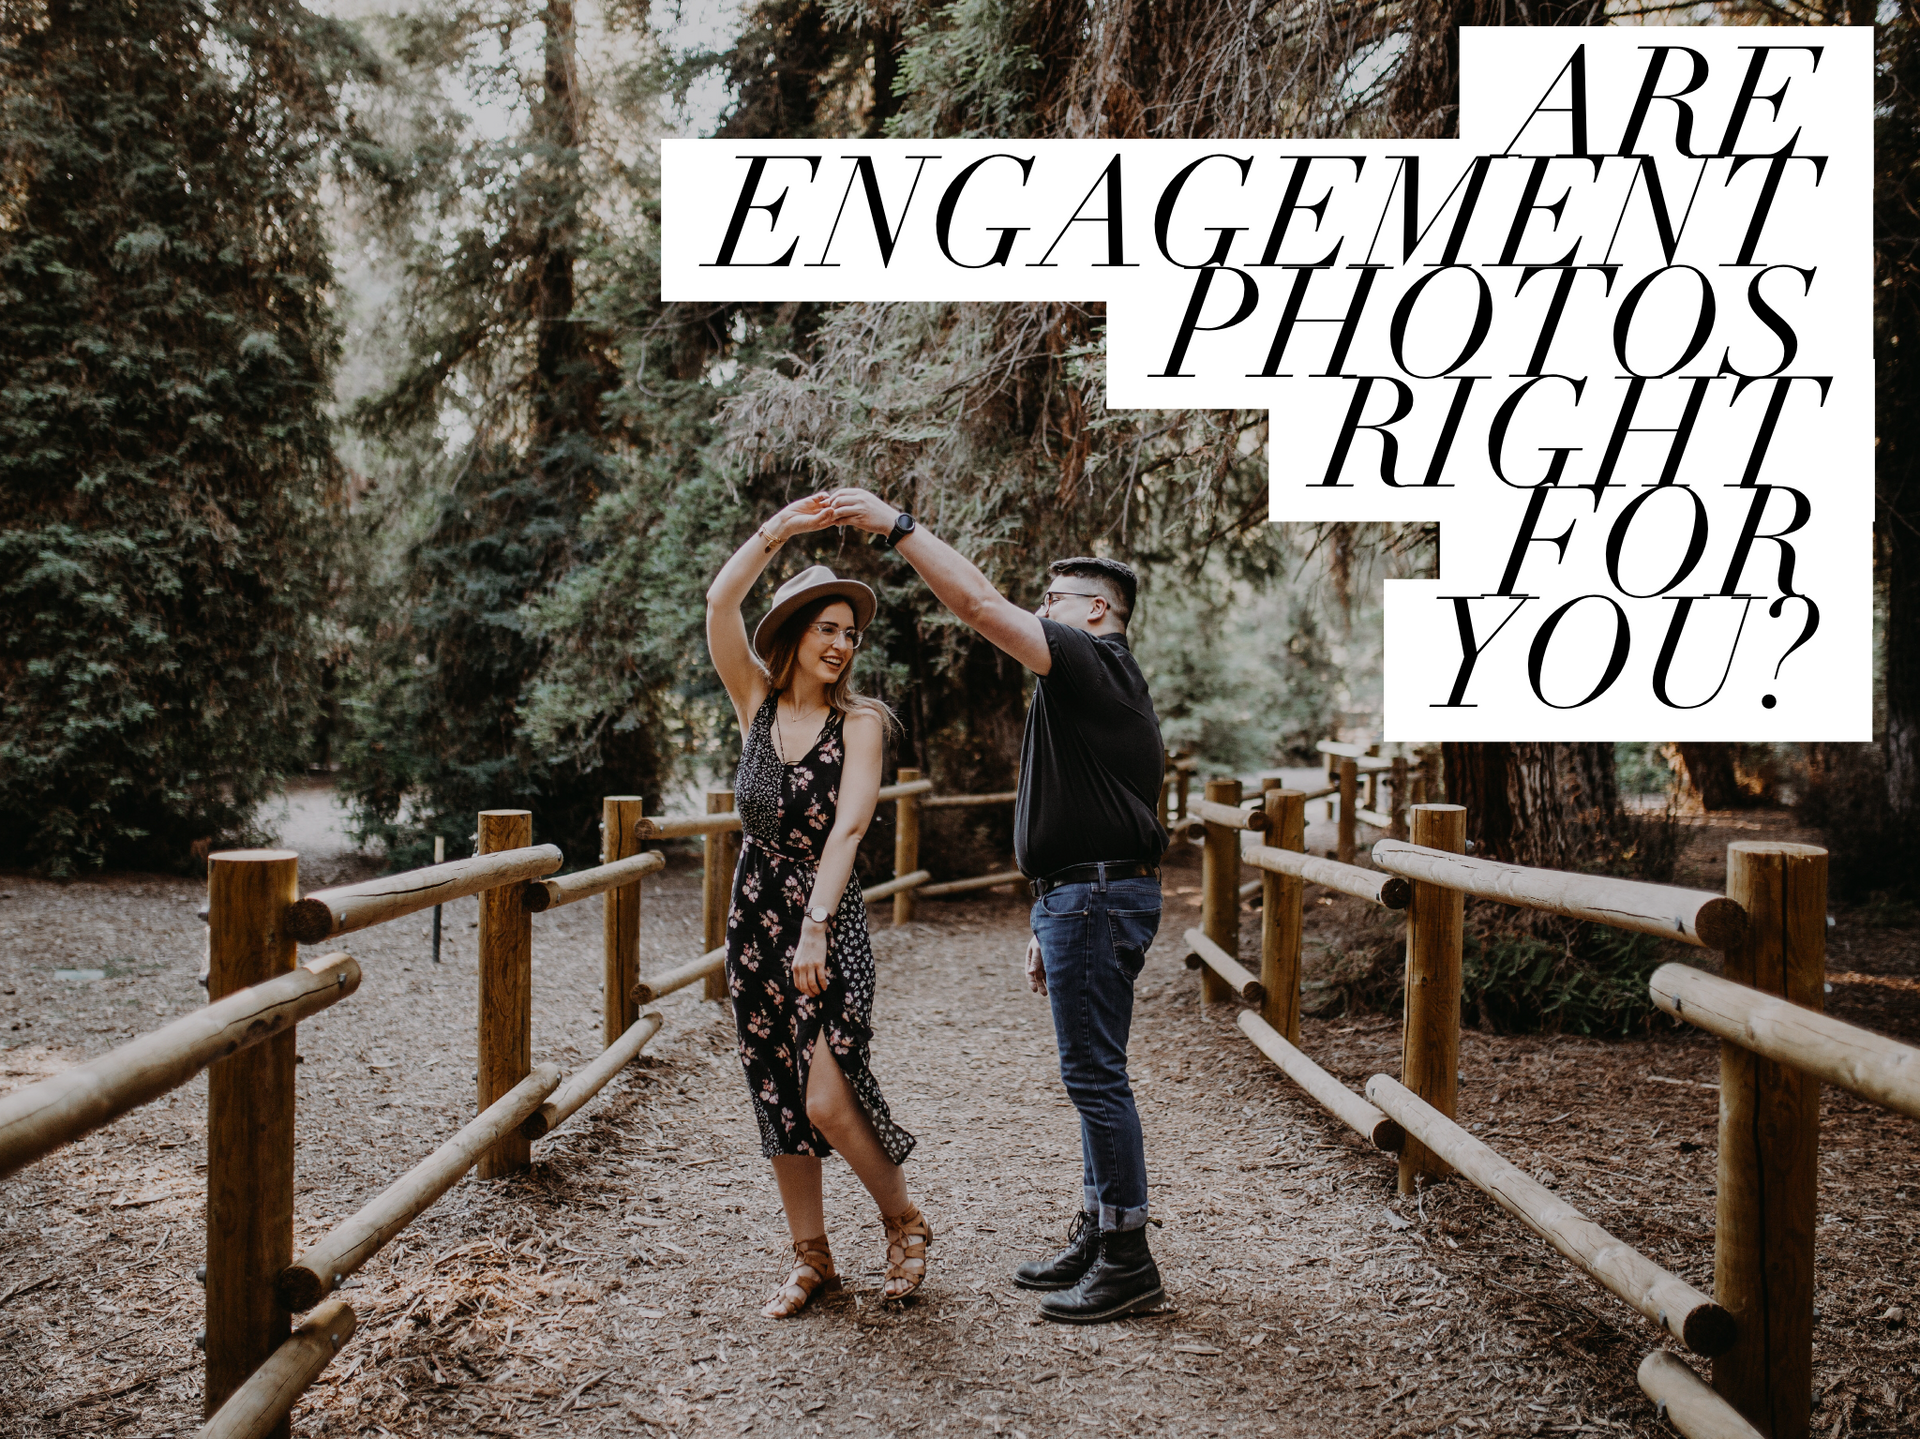 The Pros and Cons of Engagement Photos